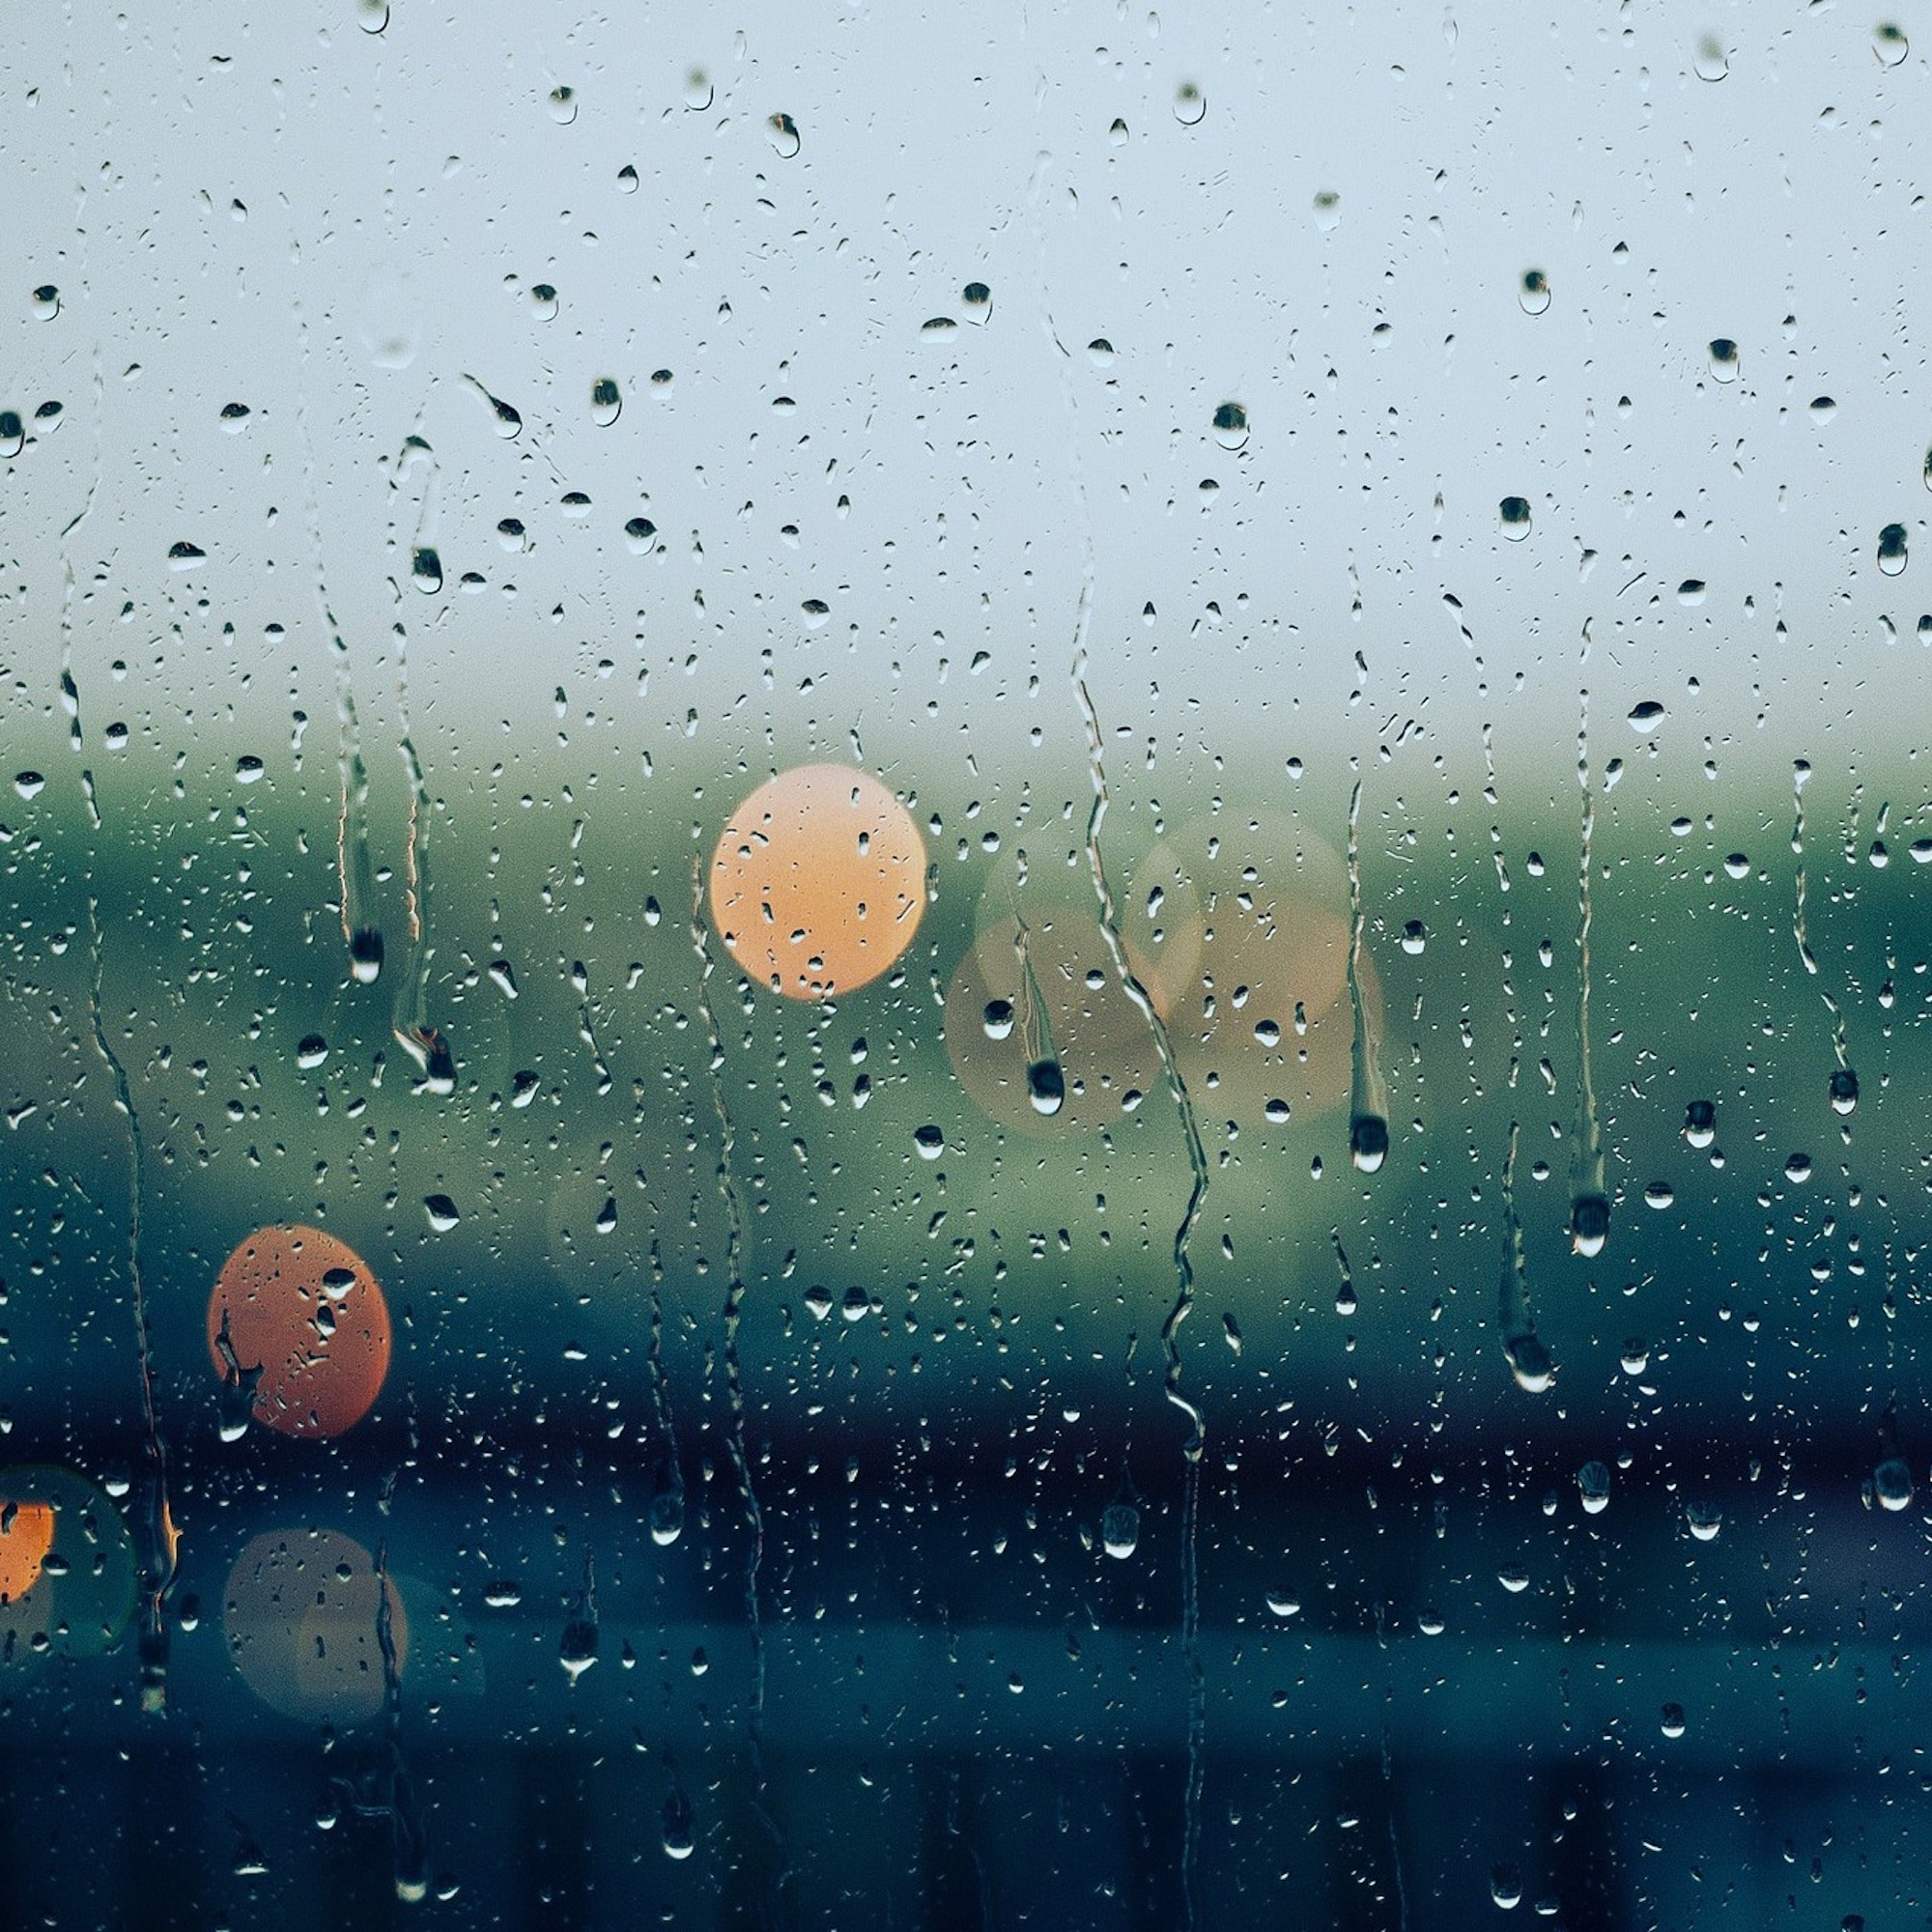 20 Peaceful Ambient Rain Recordings for Relaxation, Focus, and Sleep (Loop)